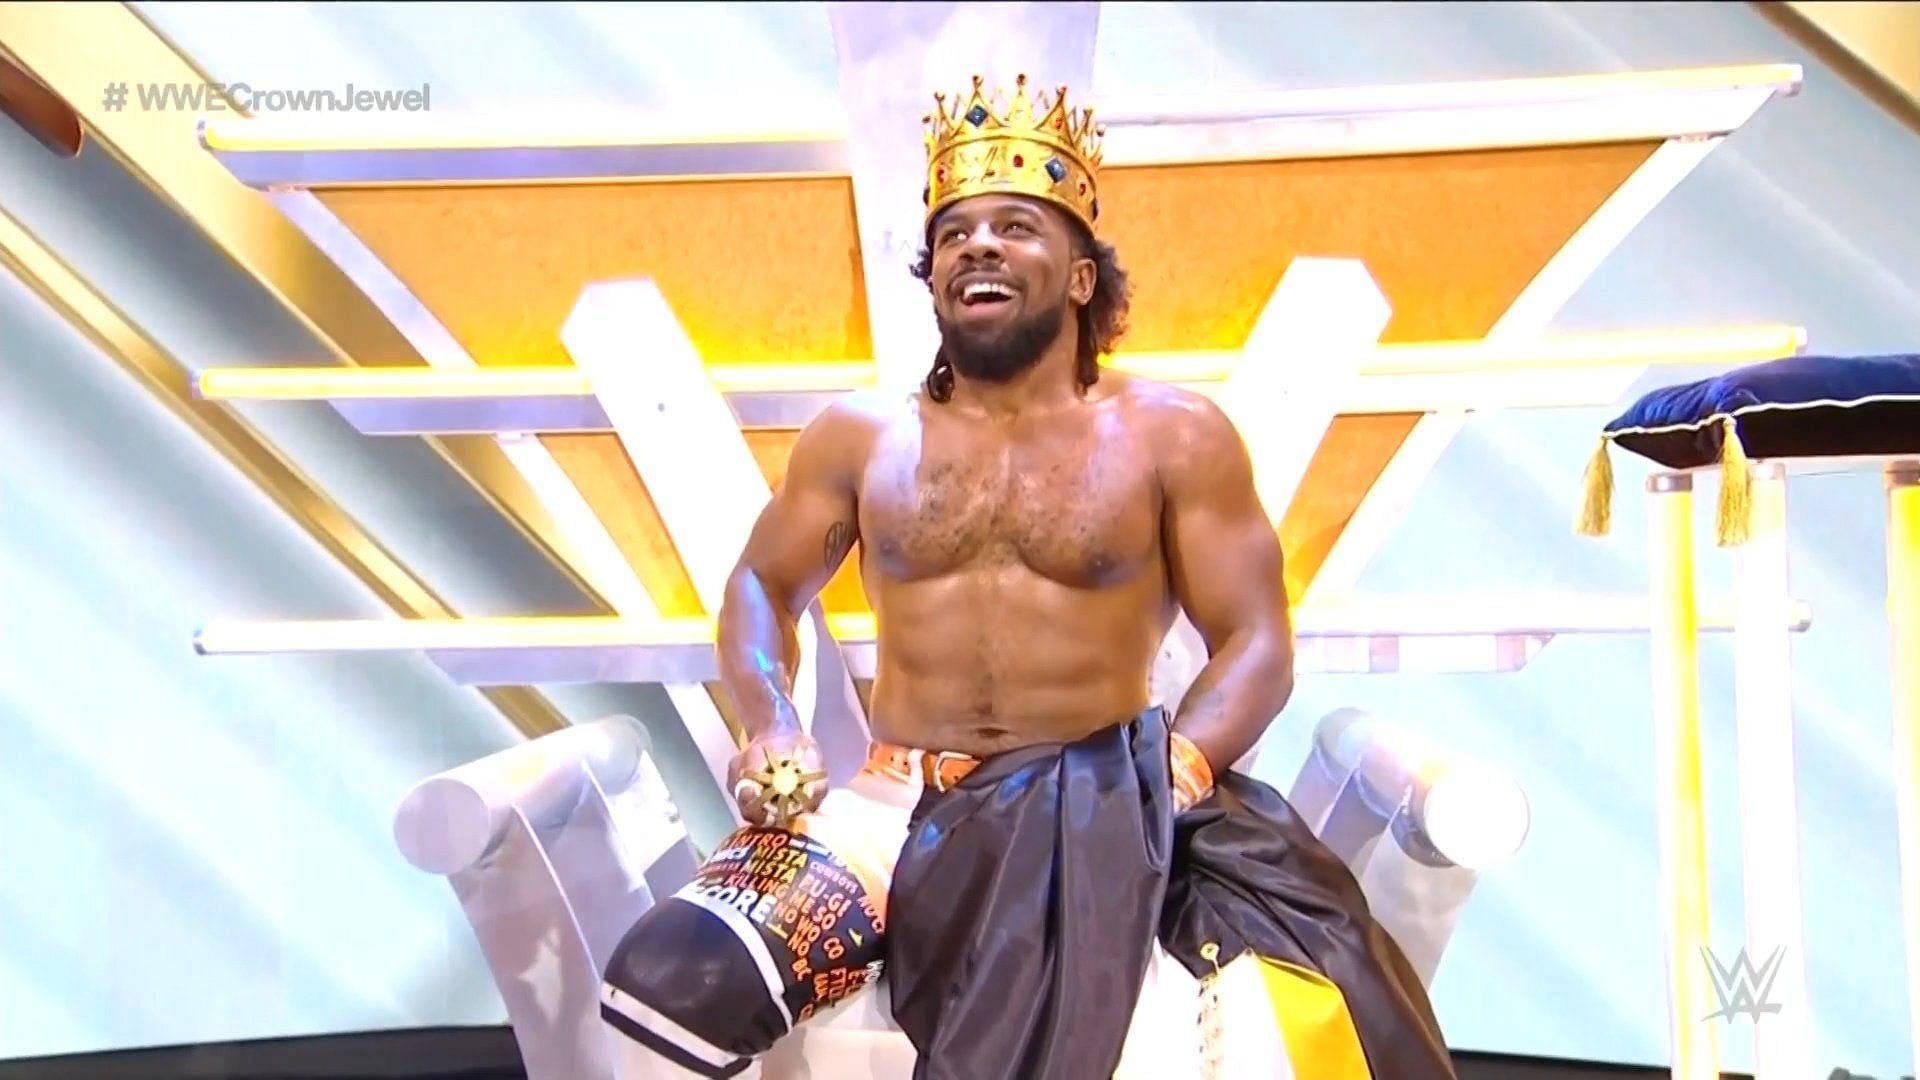 Xavier Woods is the current King of the Ring